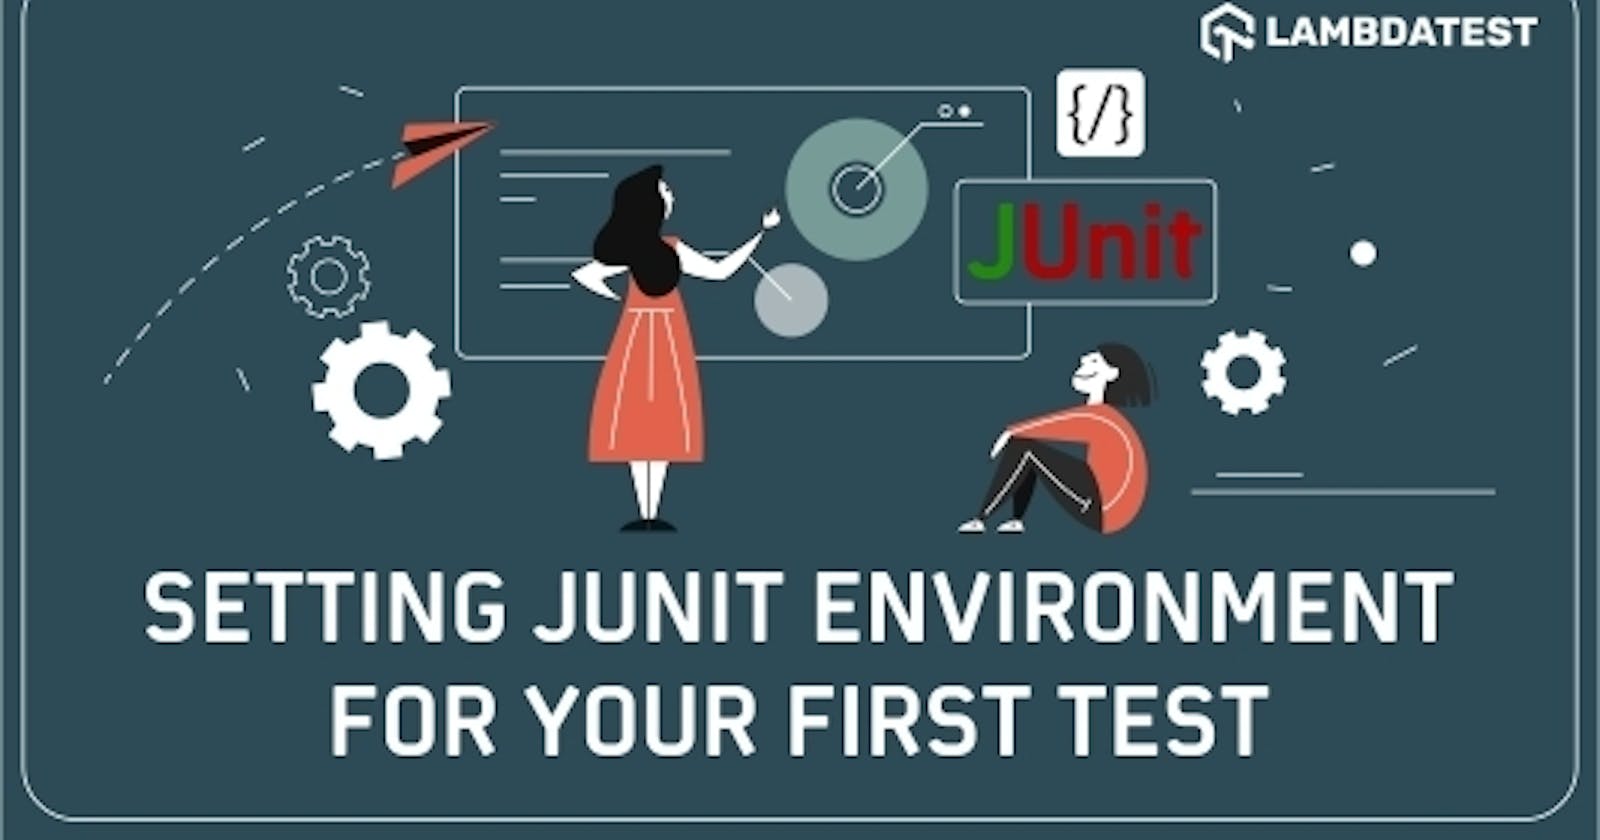 How To Setup JUnit Environment For Your First Test?